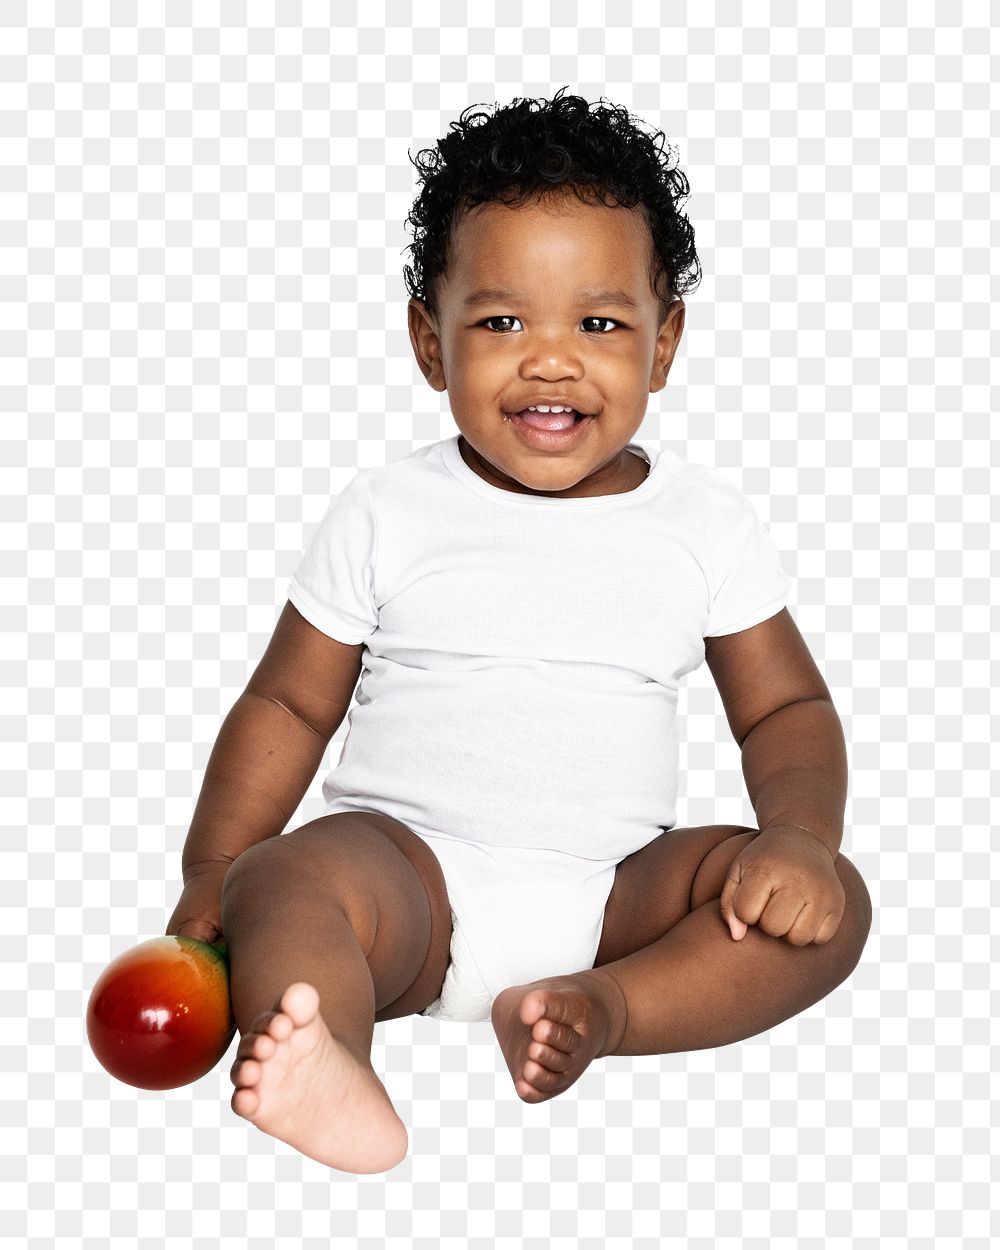 Cheerful toddler sitting png sticker, transparent background